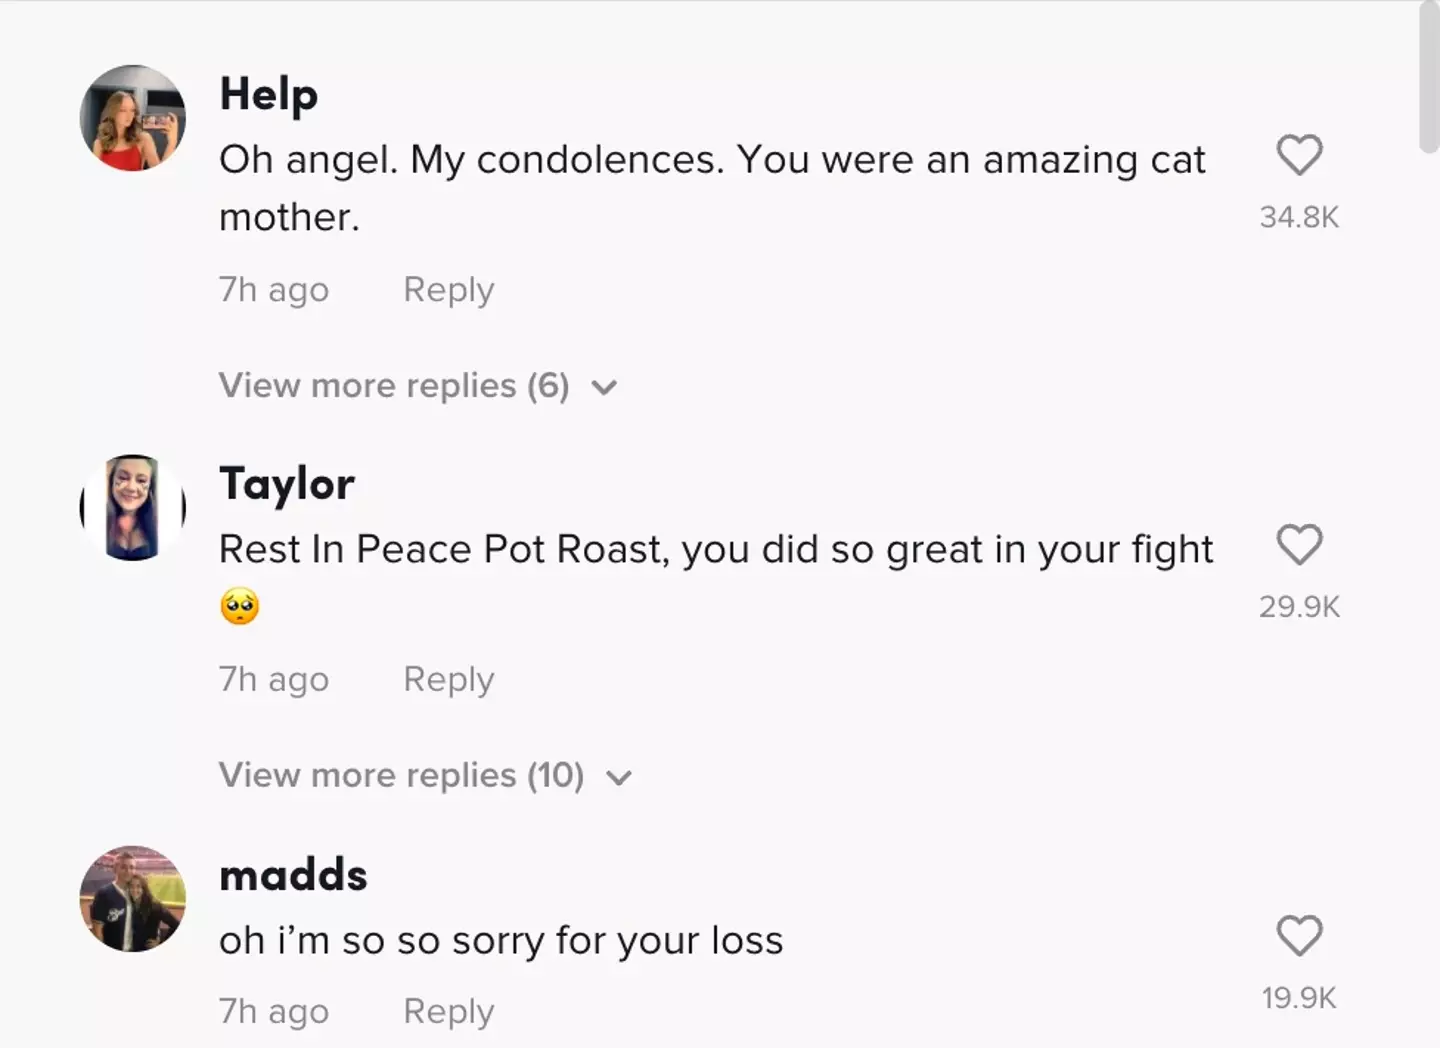 Fans have penned tributes to Pot Roast the cat on TikTok after her recent passing (TikTok @potroastsmom)